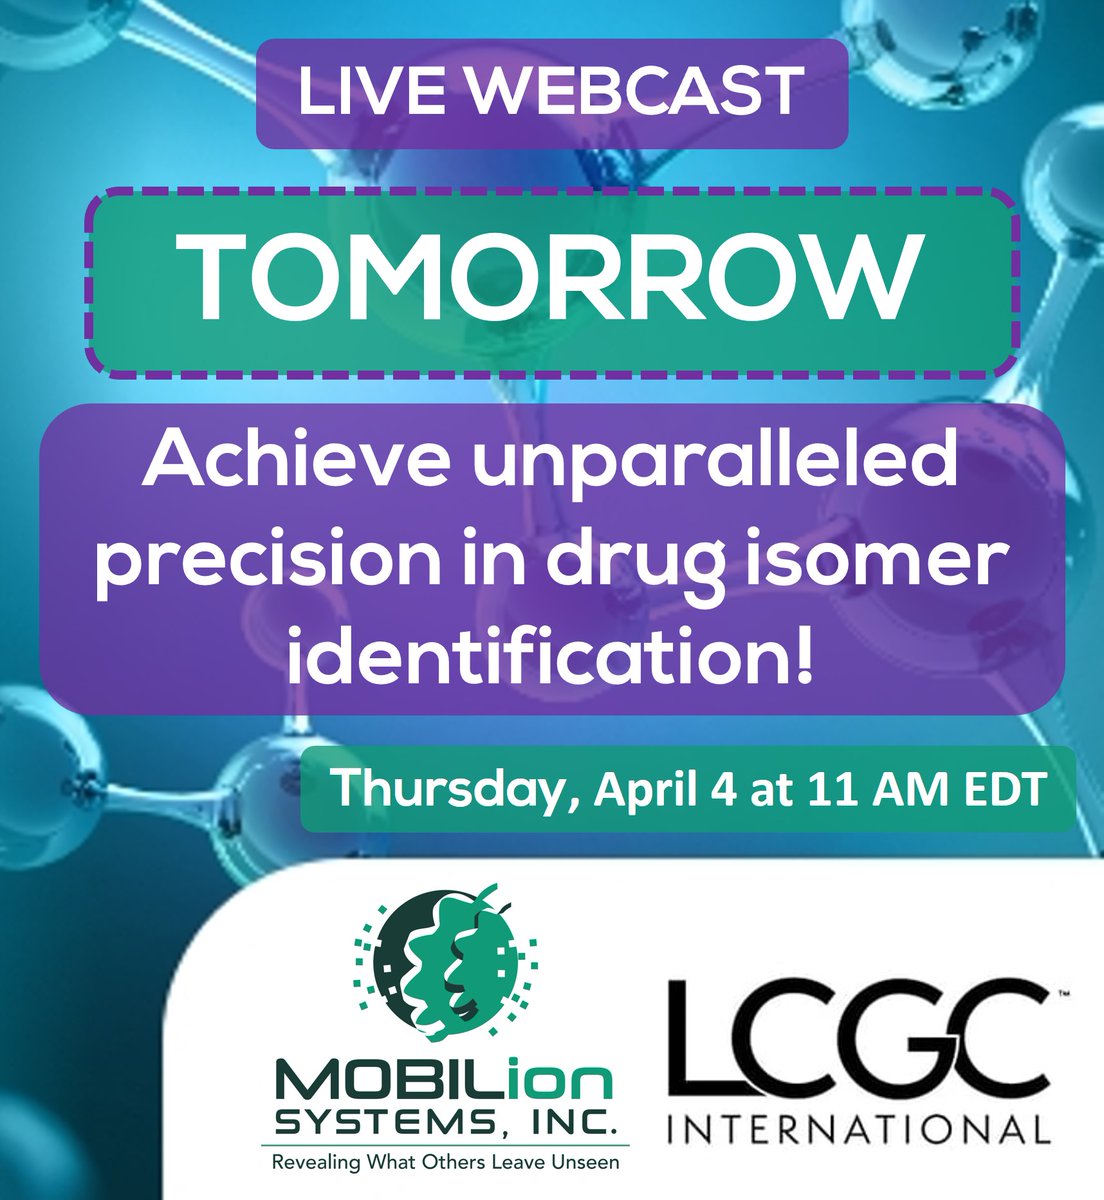 Join our webcast tomorrow at 11 AM EDT for expert insights on drug isomer identification with Asst. Prof. Christopher Chouinard & moderator Bob Alaburda. Discover advanced analysis methods. Register for free: hubs.ly/Q02qKG6y0. @LC_GC @ClemsonUniv